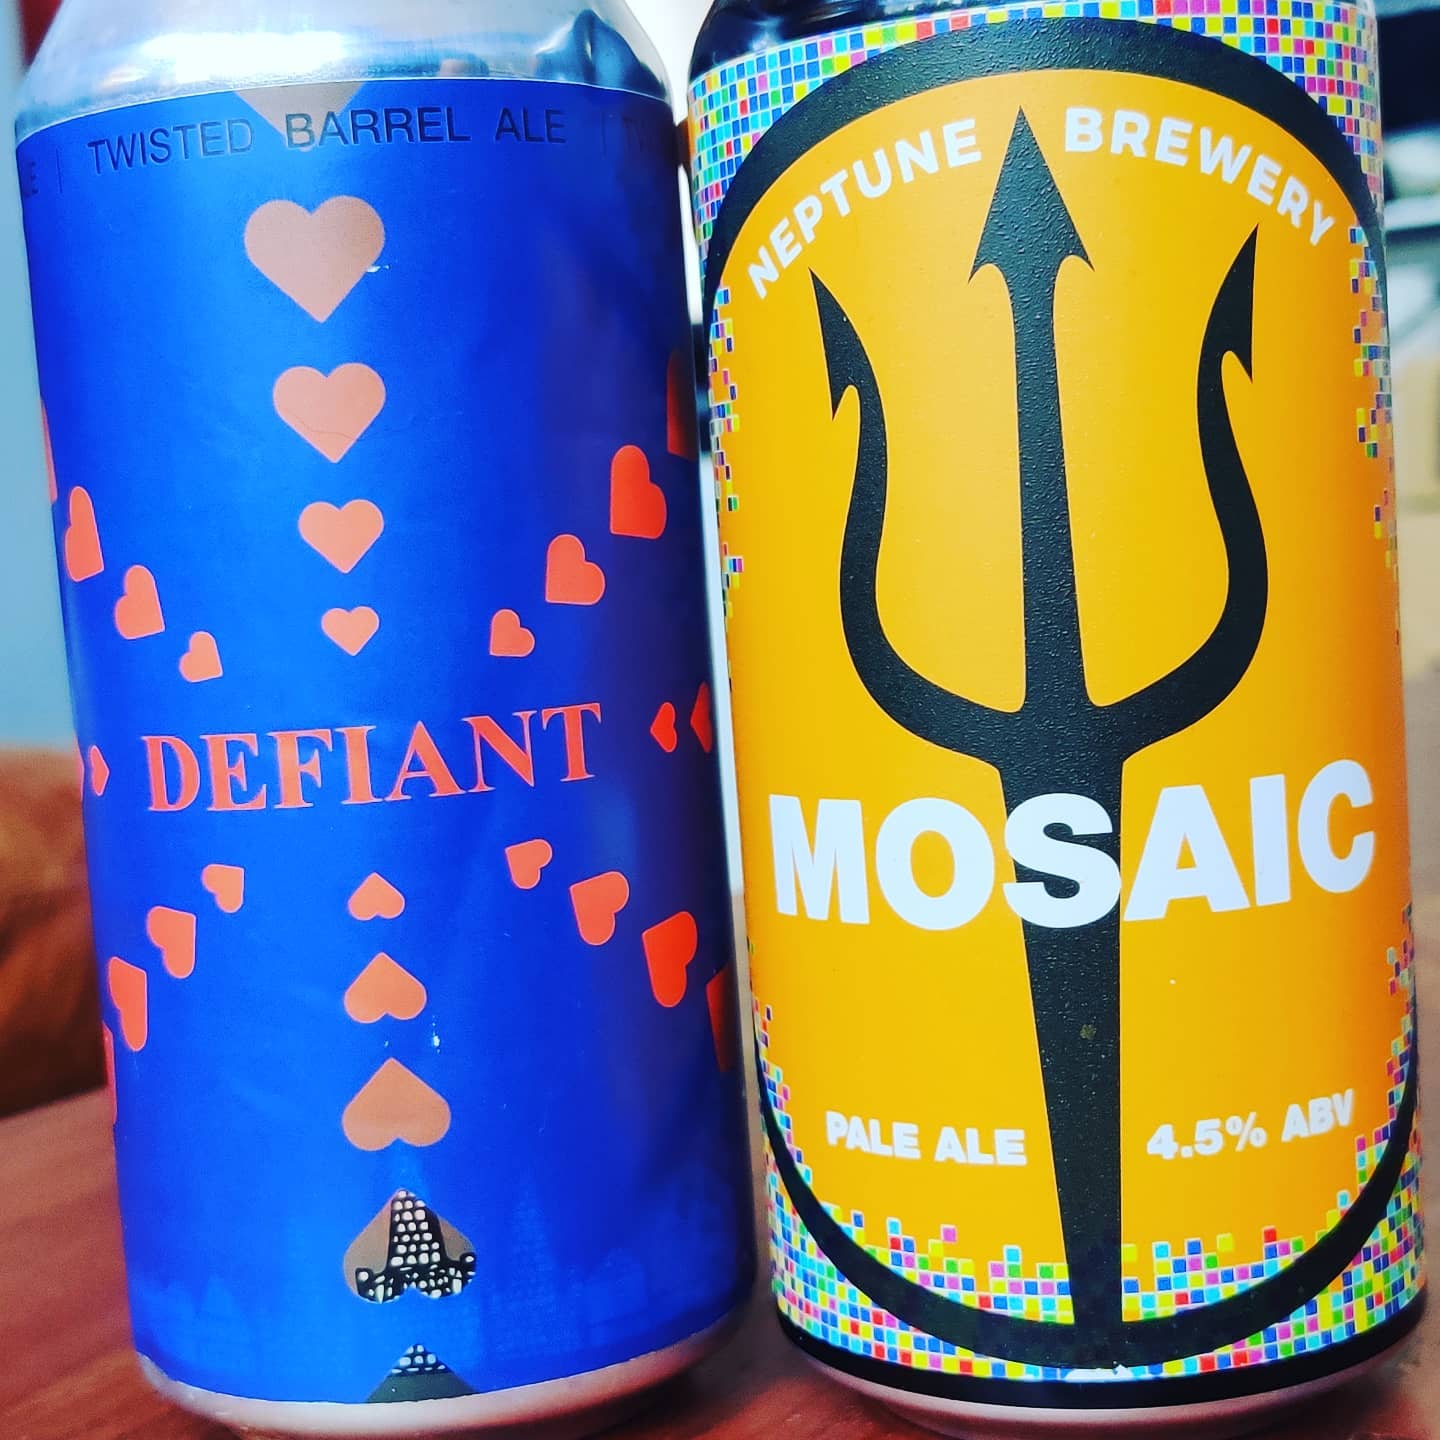 2 absolutely stunning beers I'm happy to be able to regularly get from the wonderful @bristolspirit – not only a wonderful place, but handily local too!